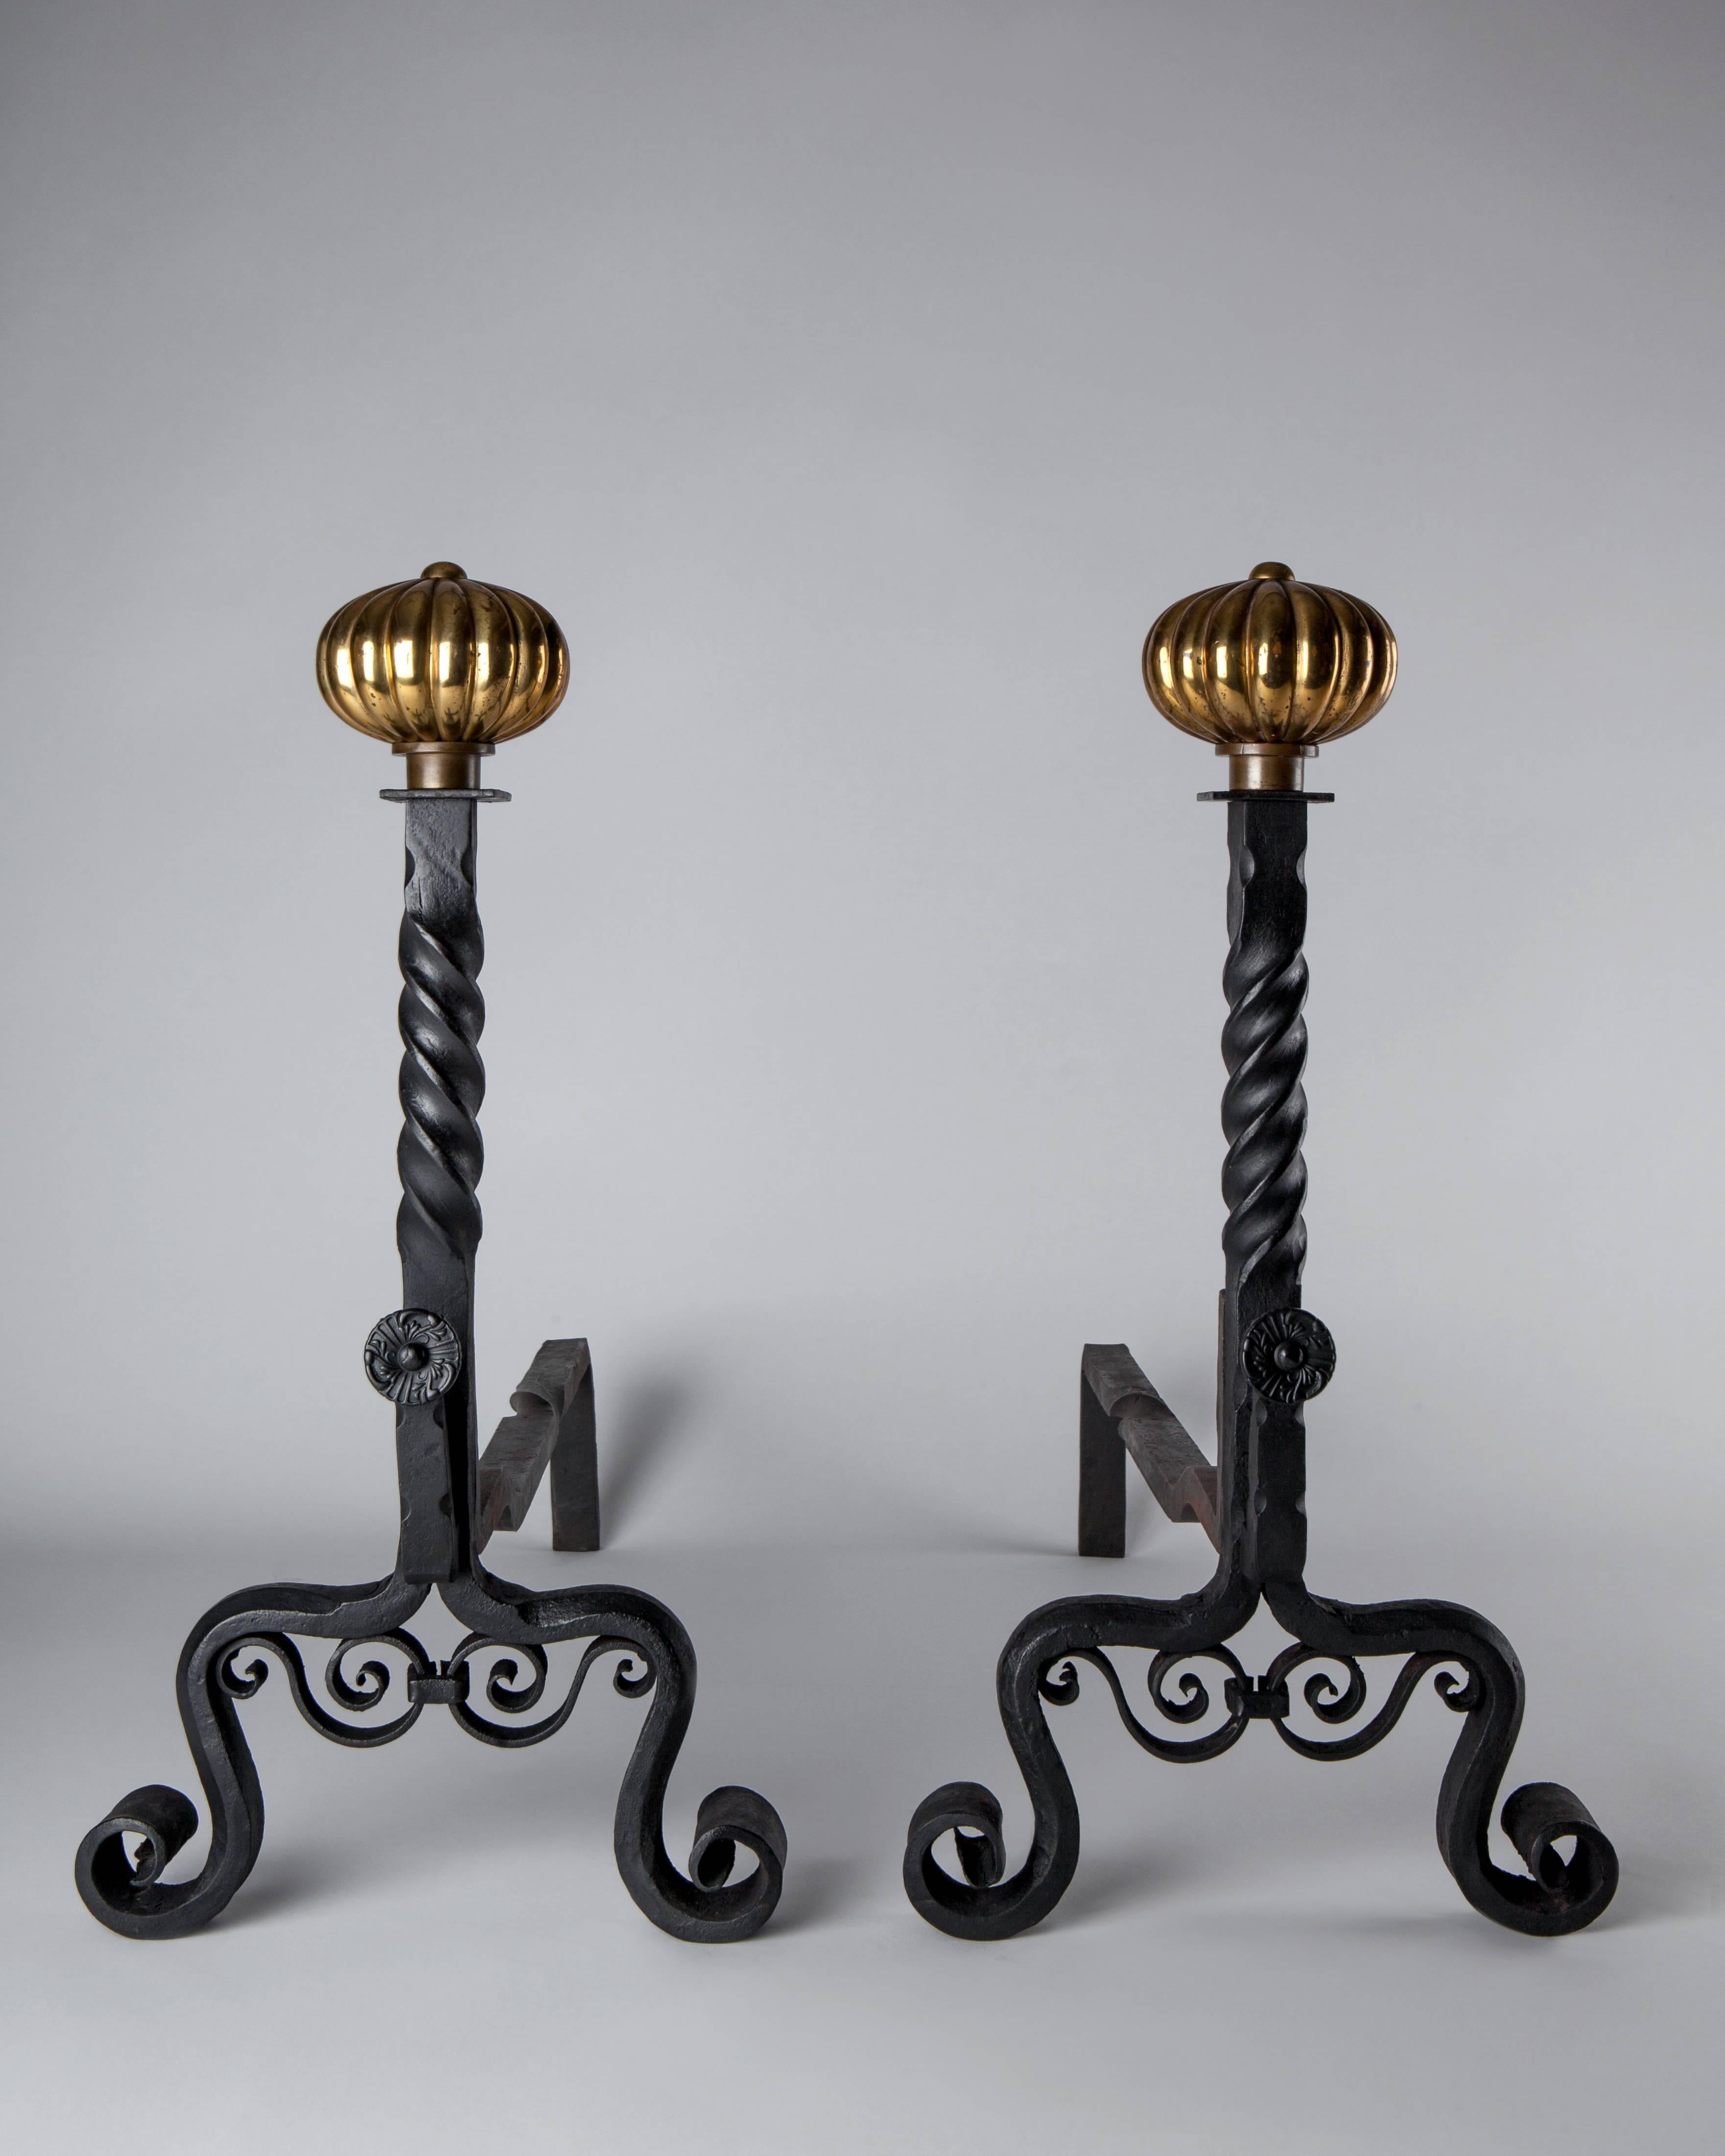 AFP0519.
A pair of antique andirons with wrought iron bodies and gadrooned knob finials in their original aged brass finish.

Dimensions:
Overall: 20-3/4